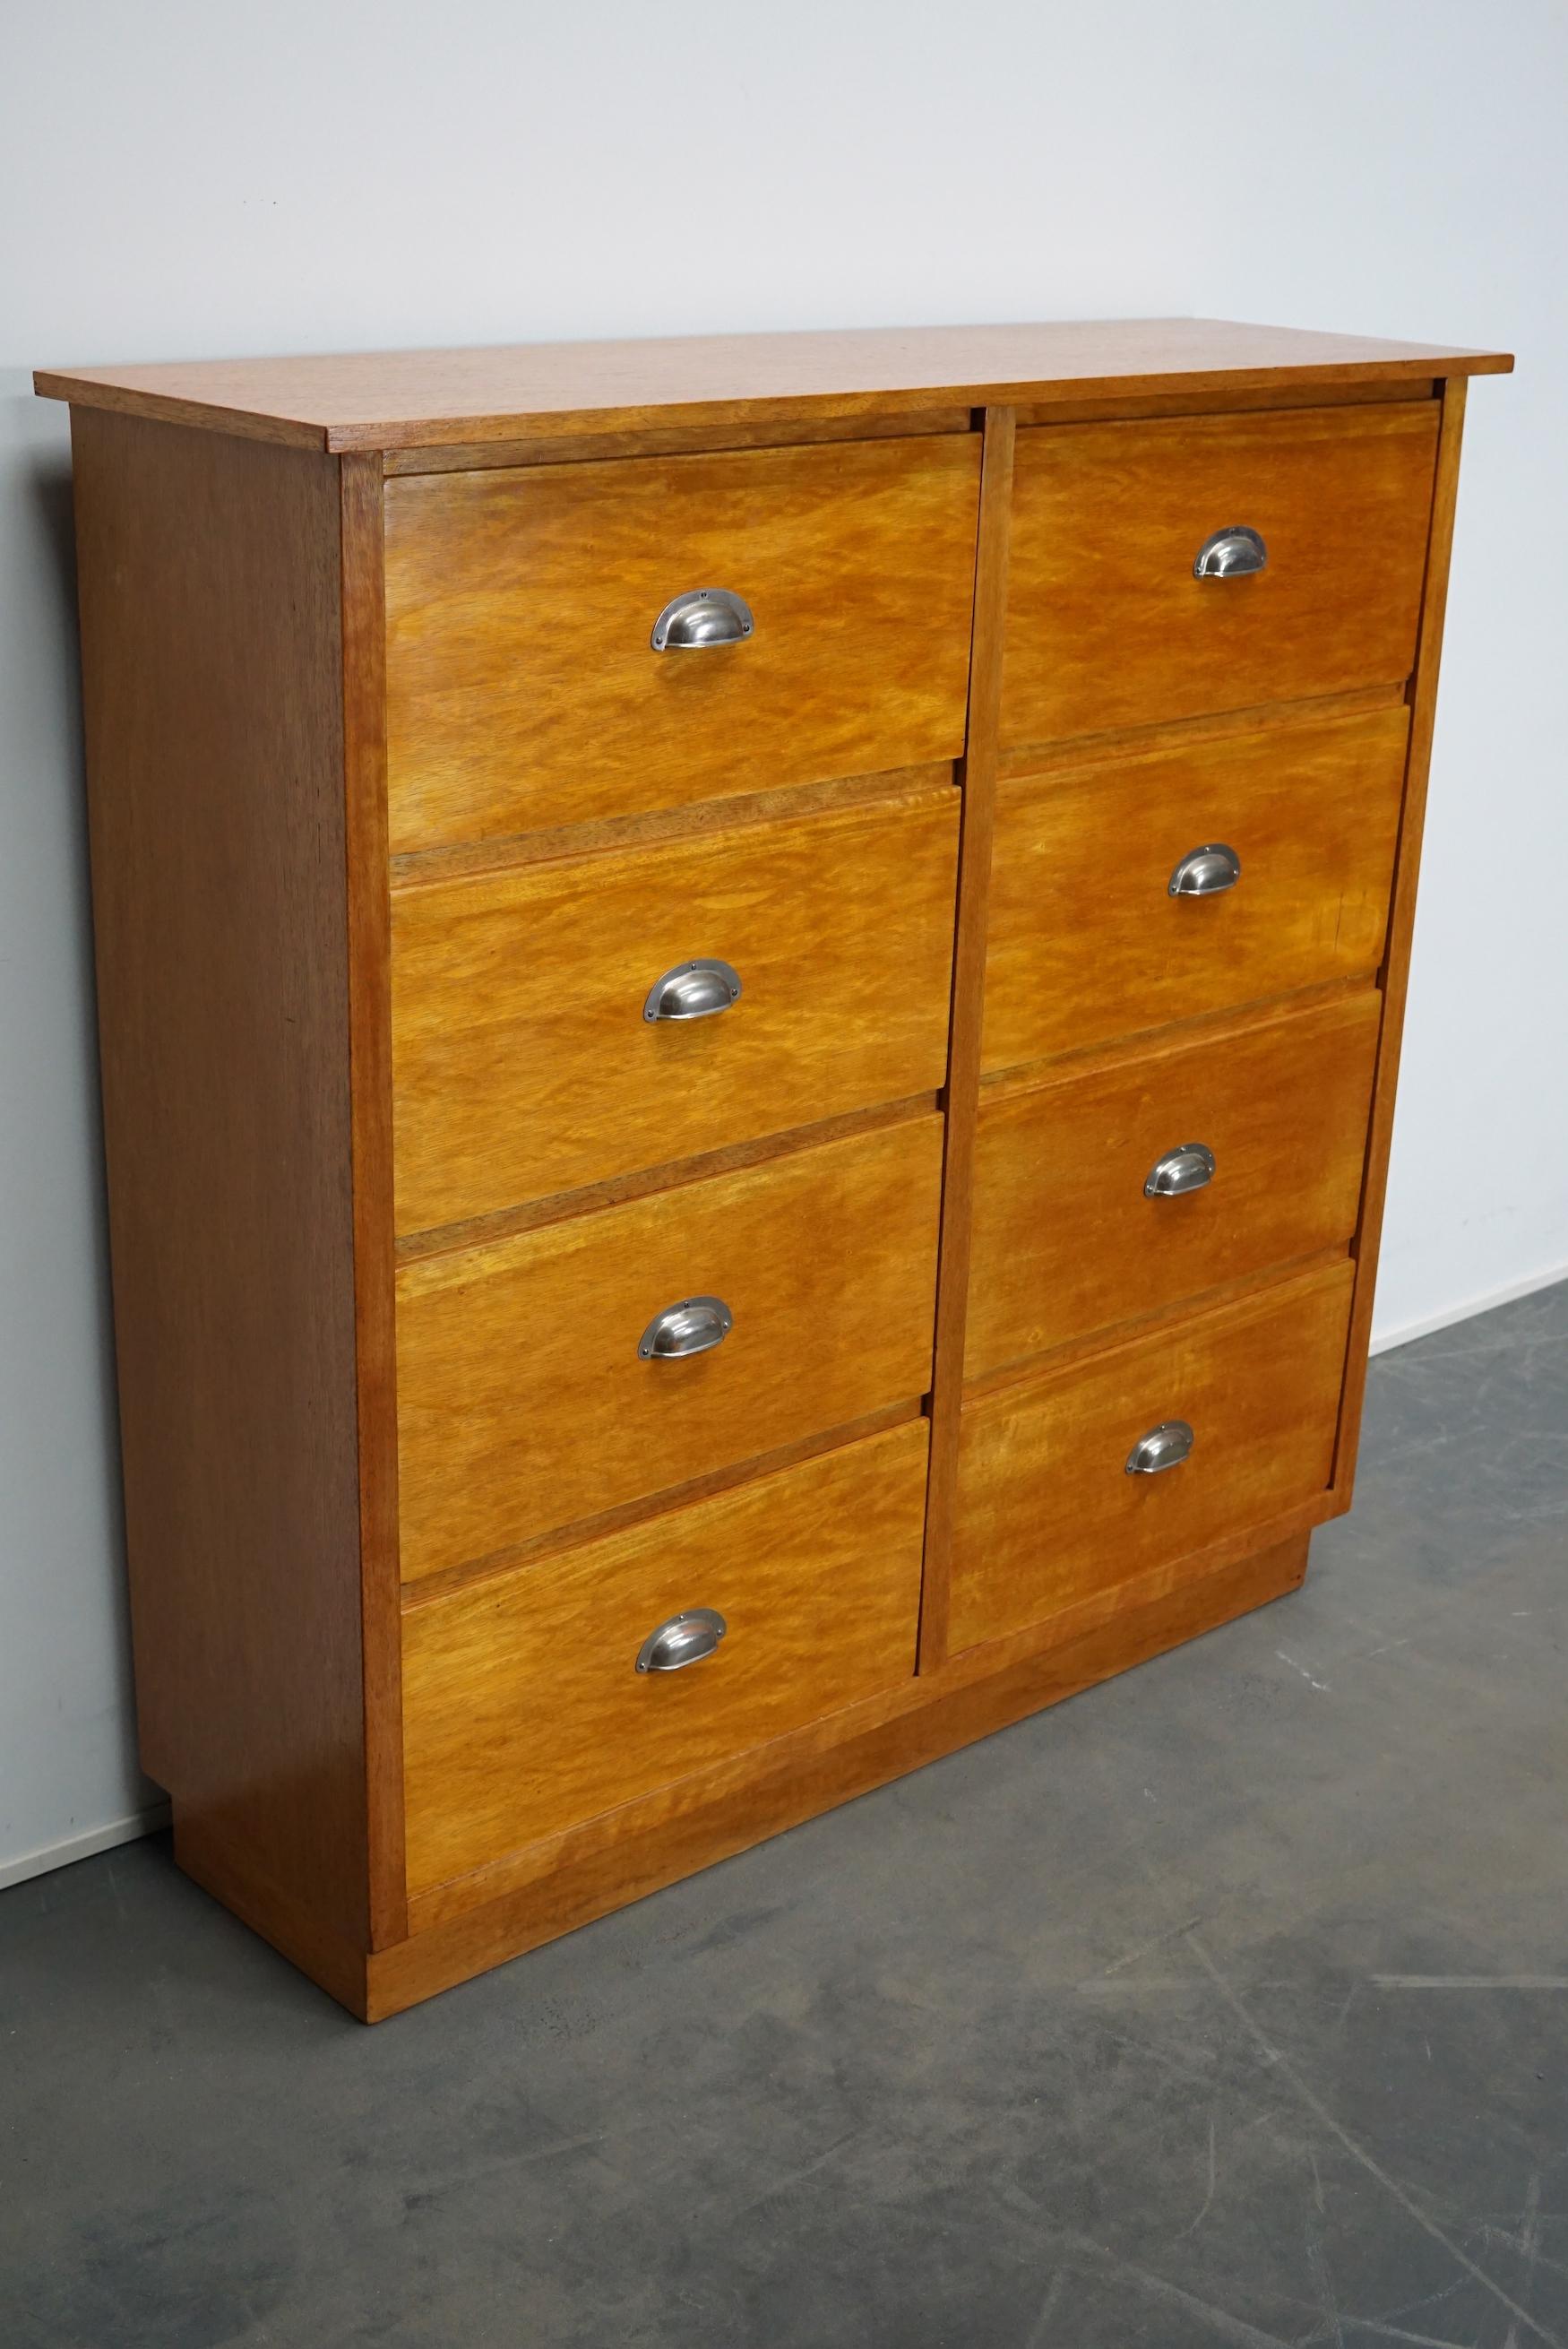 Industrial German Oak Apothecary Cabinet, Mid-20th Century For Sale